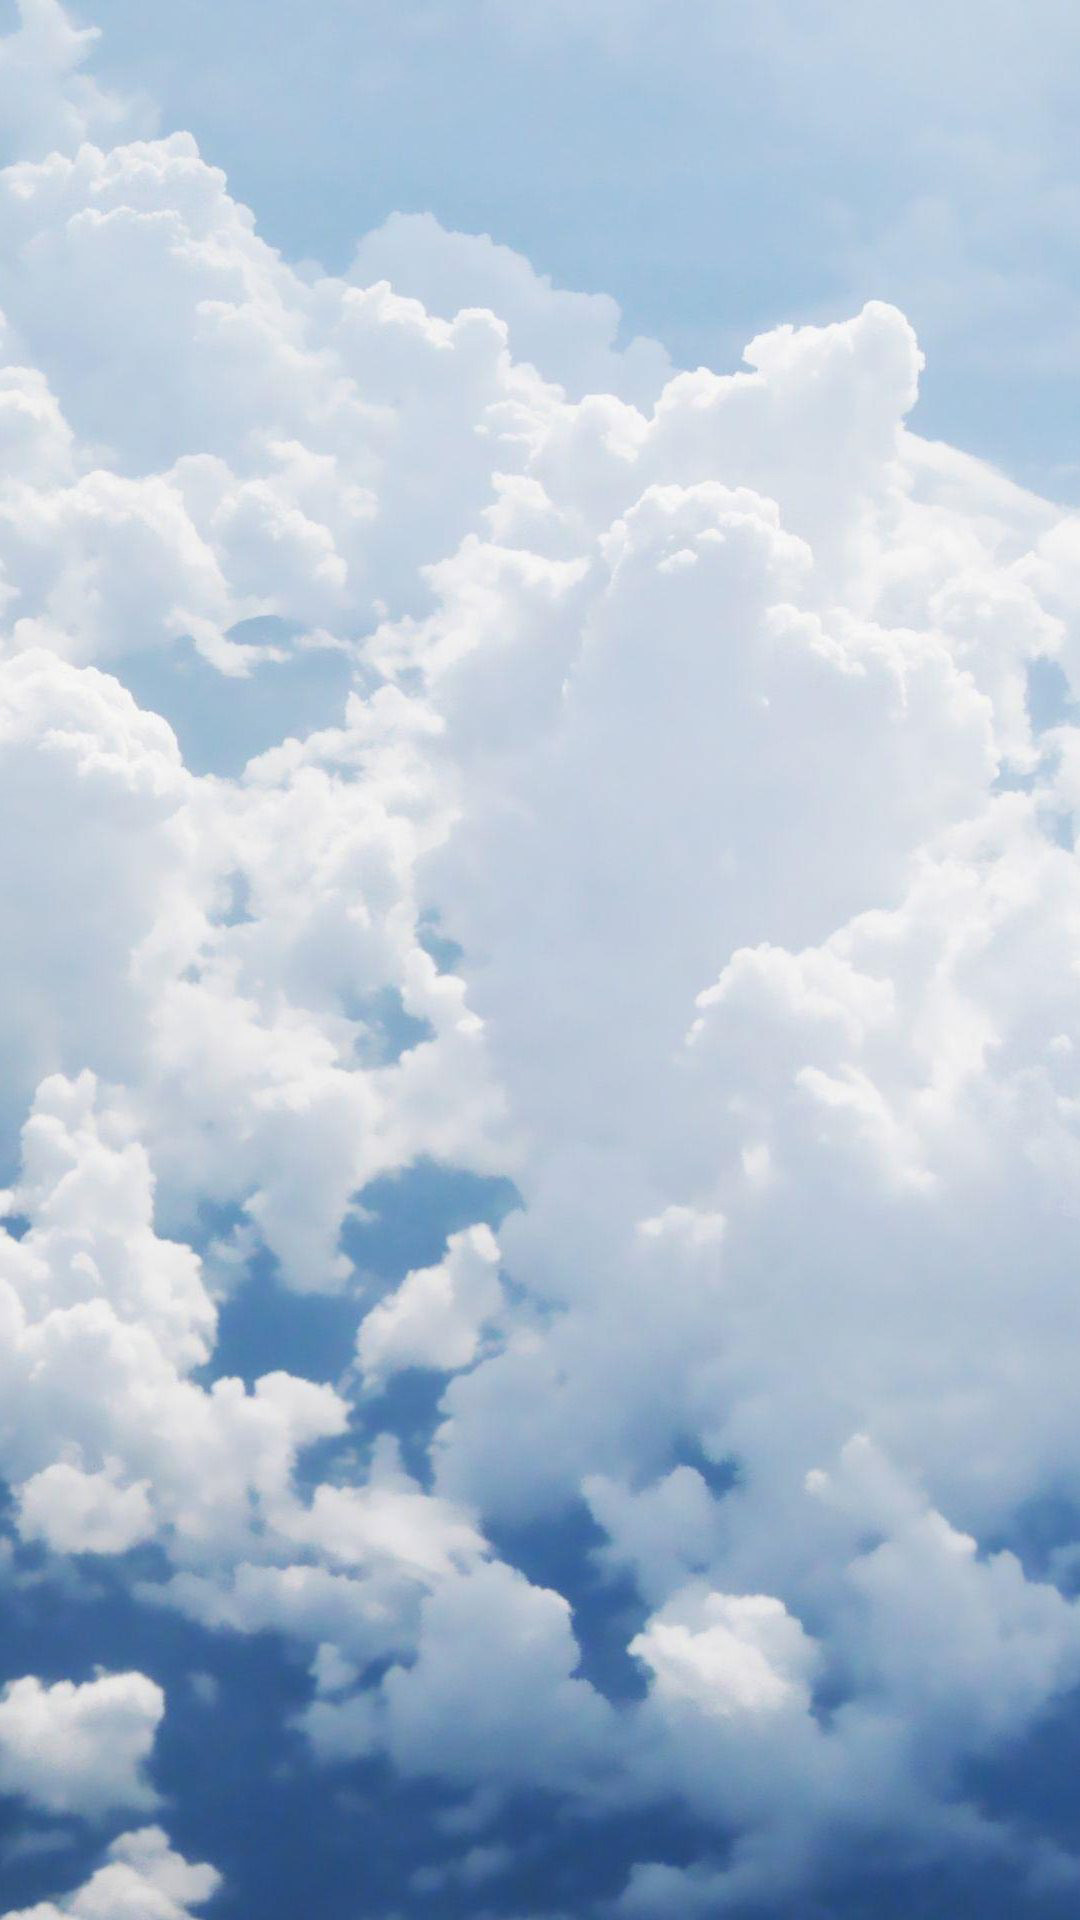 Puffy Clouds Baby Blue Sky Android Wallpaper free download. Puffy Clouds Baby  Blue Sky Android Wallpaper Free Download